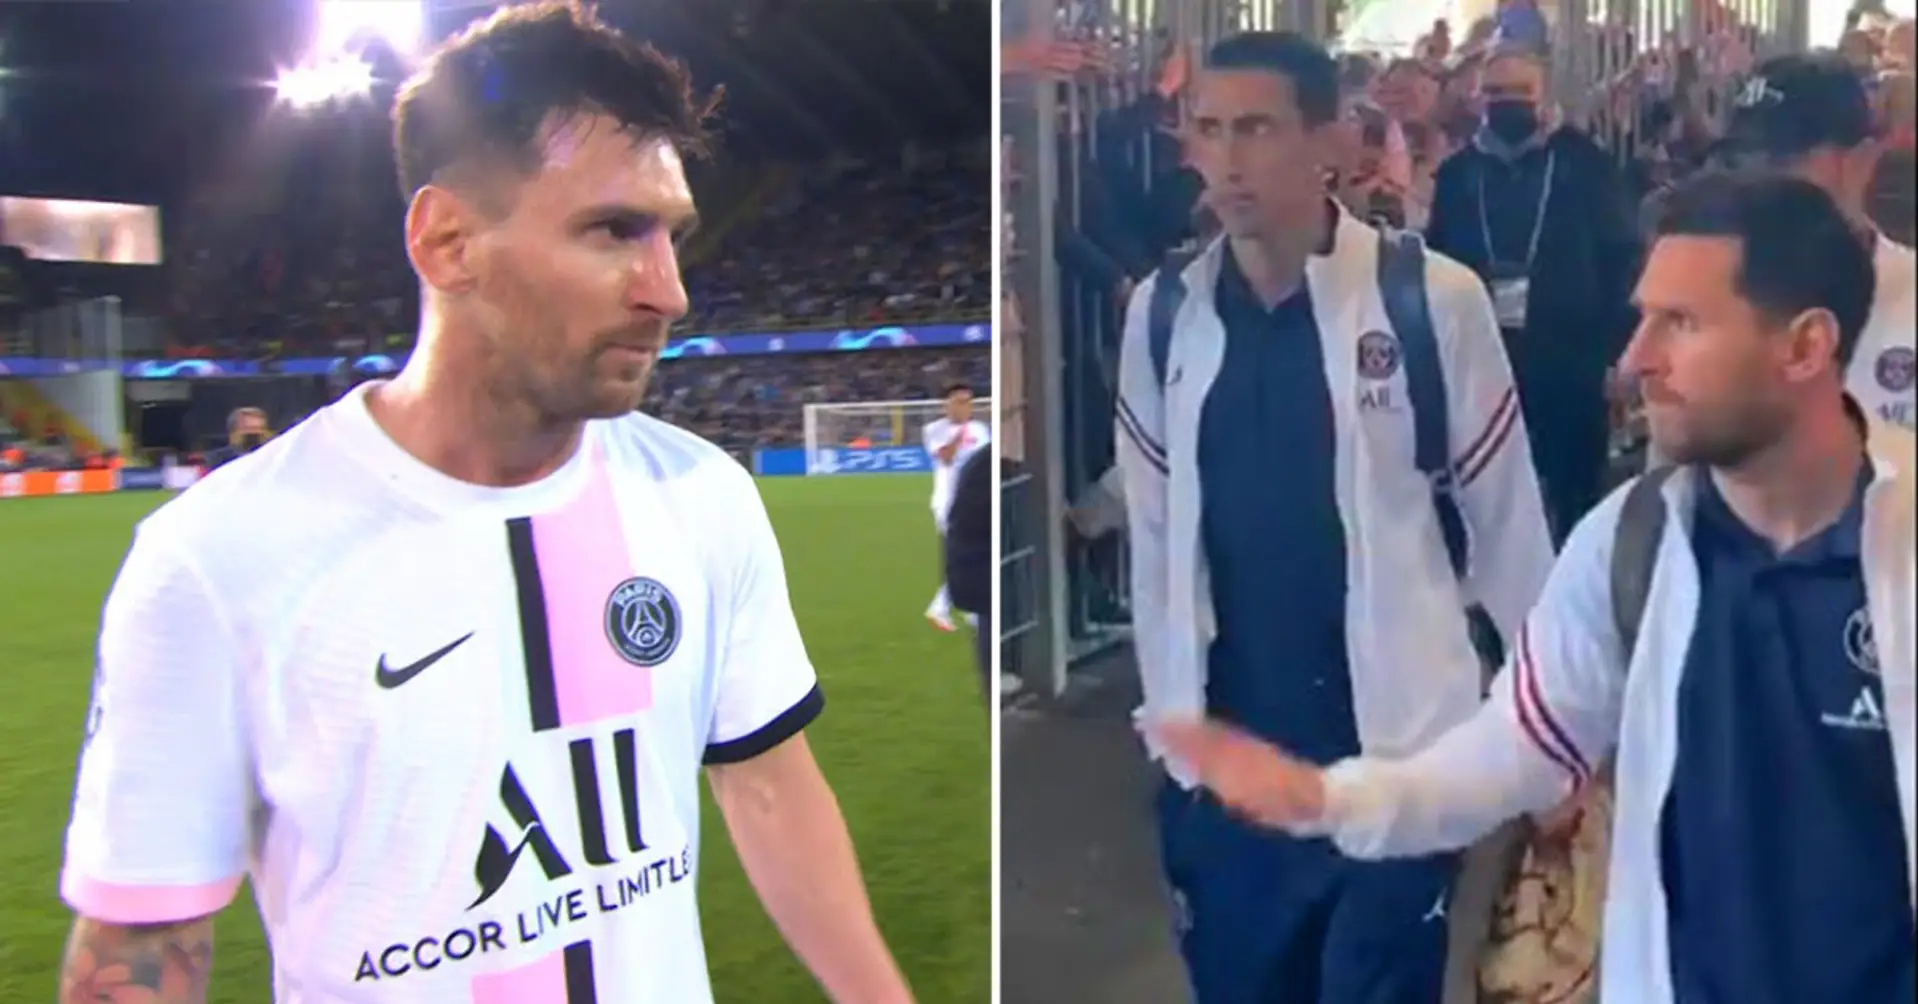 Caught on camera: Awkward moment involving Lionel Messi and Di Maria after PSG’s defeat